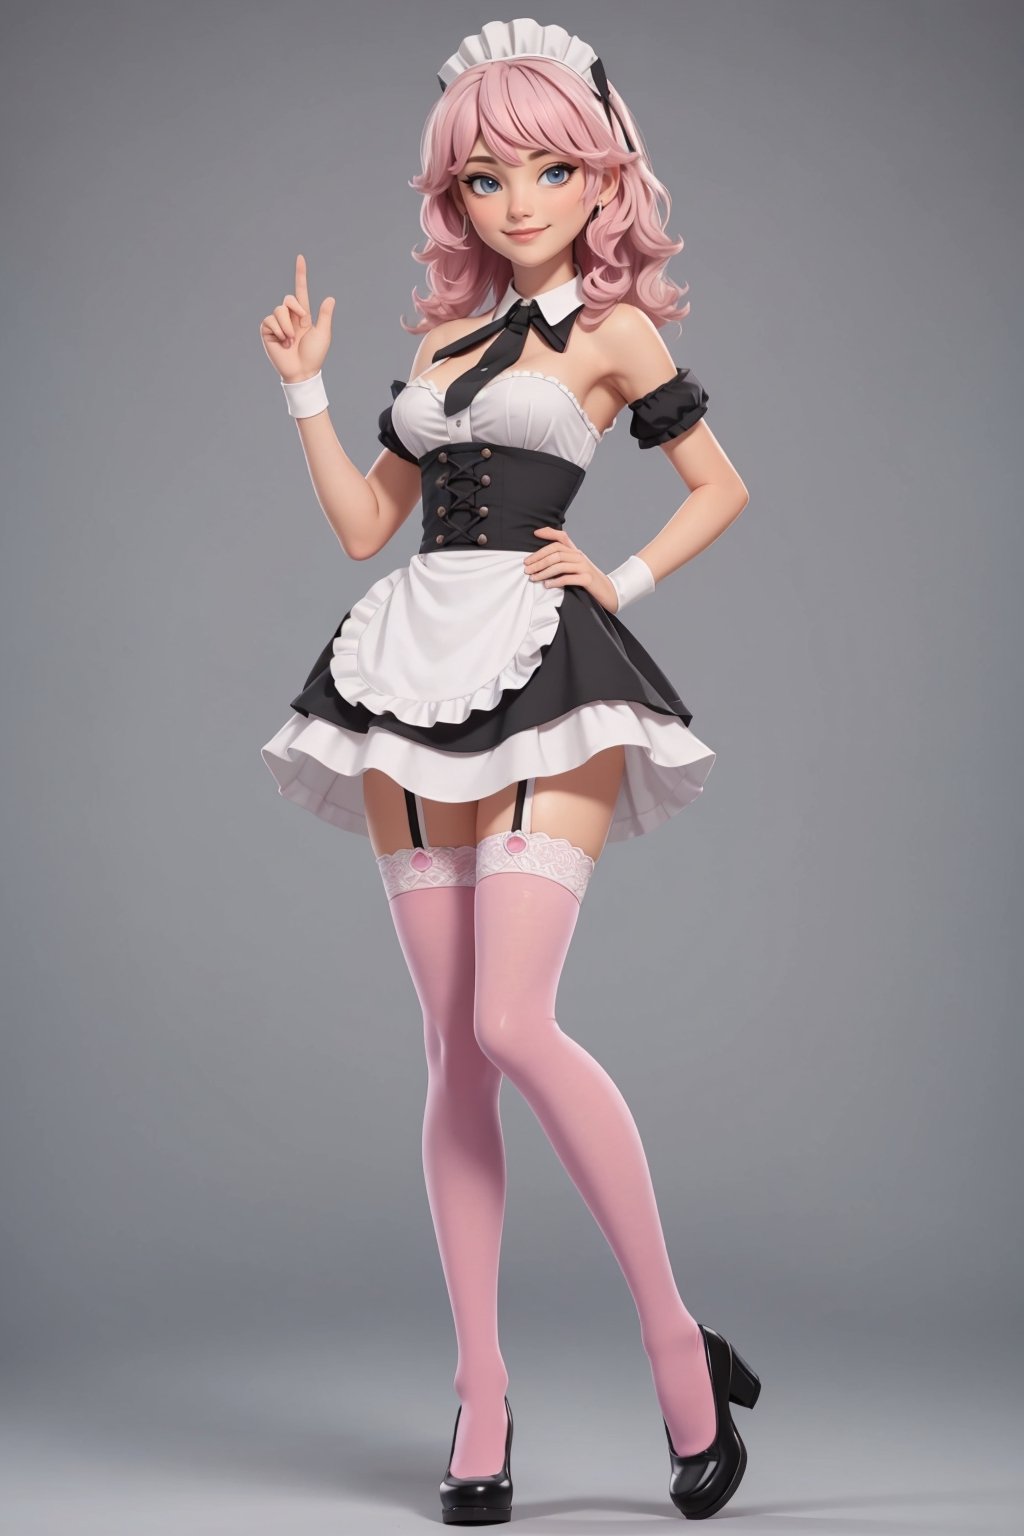 character sheet, beautiful, good hands, full body, good body, 18 year old girl body, sexy pose, full_body,character_sheet, shoulder length fluffy semi wavy hair, pink hair, maid clothes, white stockings, only stockings, looking to the camera